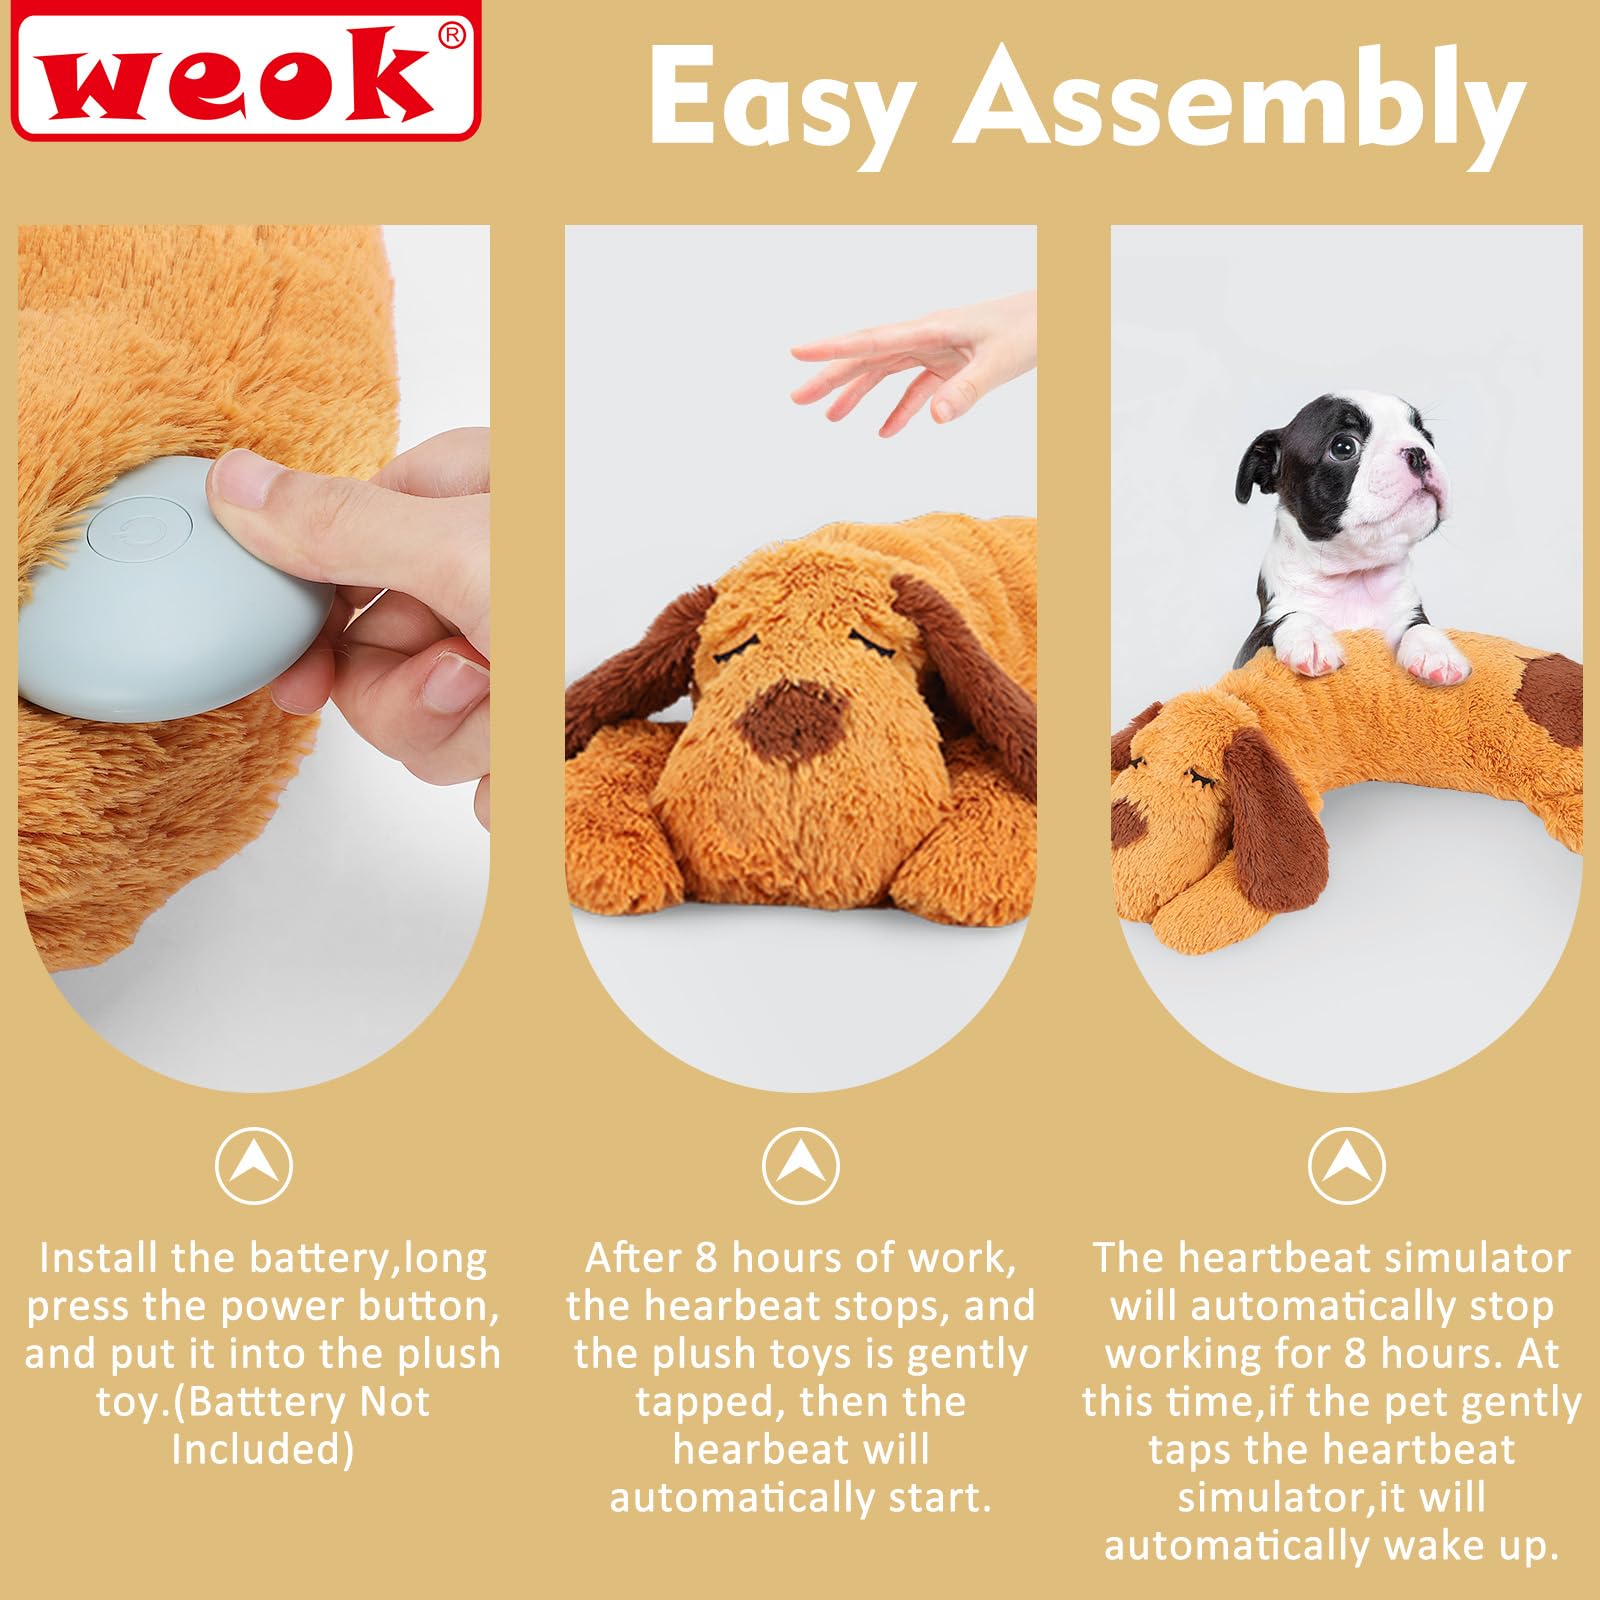 WEOK Heartbeat Puppy Toy - Comfort Cuddler Pillow, Dog Anxiety Relief Calming Aid,Heartbeat Stuffed Toy for Dogs,Puppy Heartbeat Toy Sleep Aid,Dog Heartbeat Toy for Pet